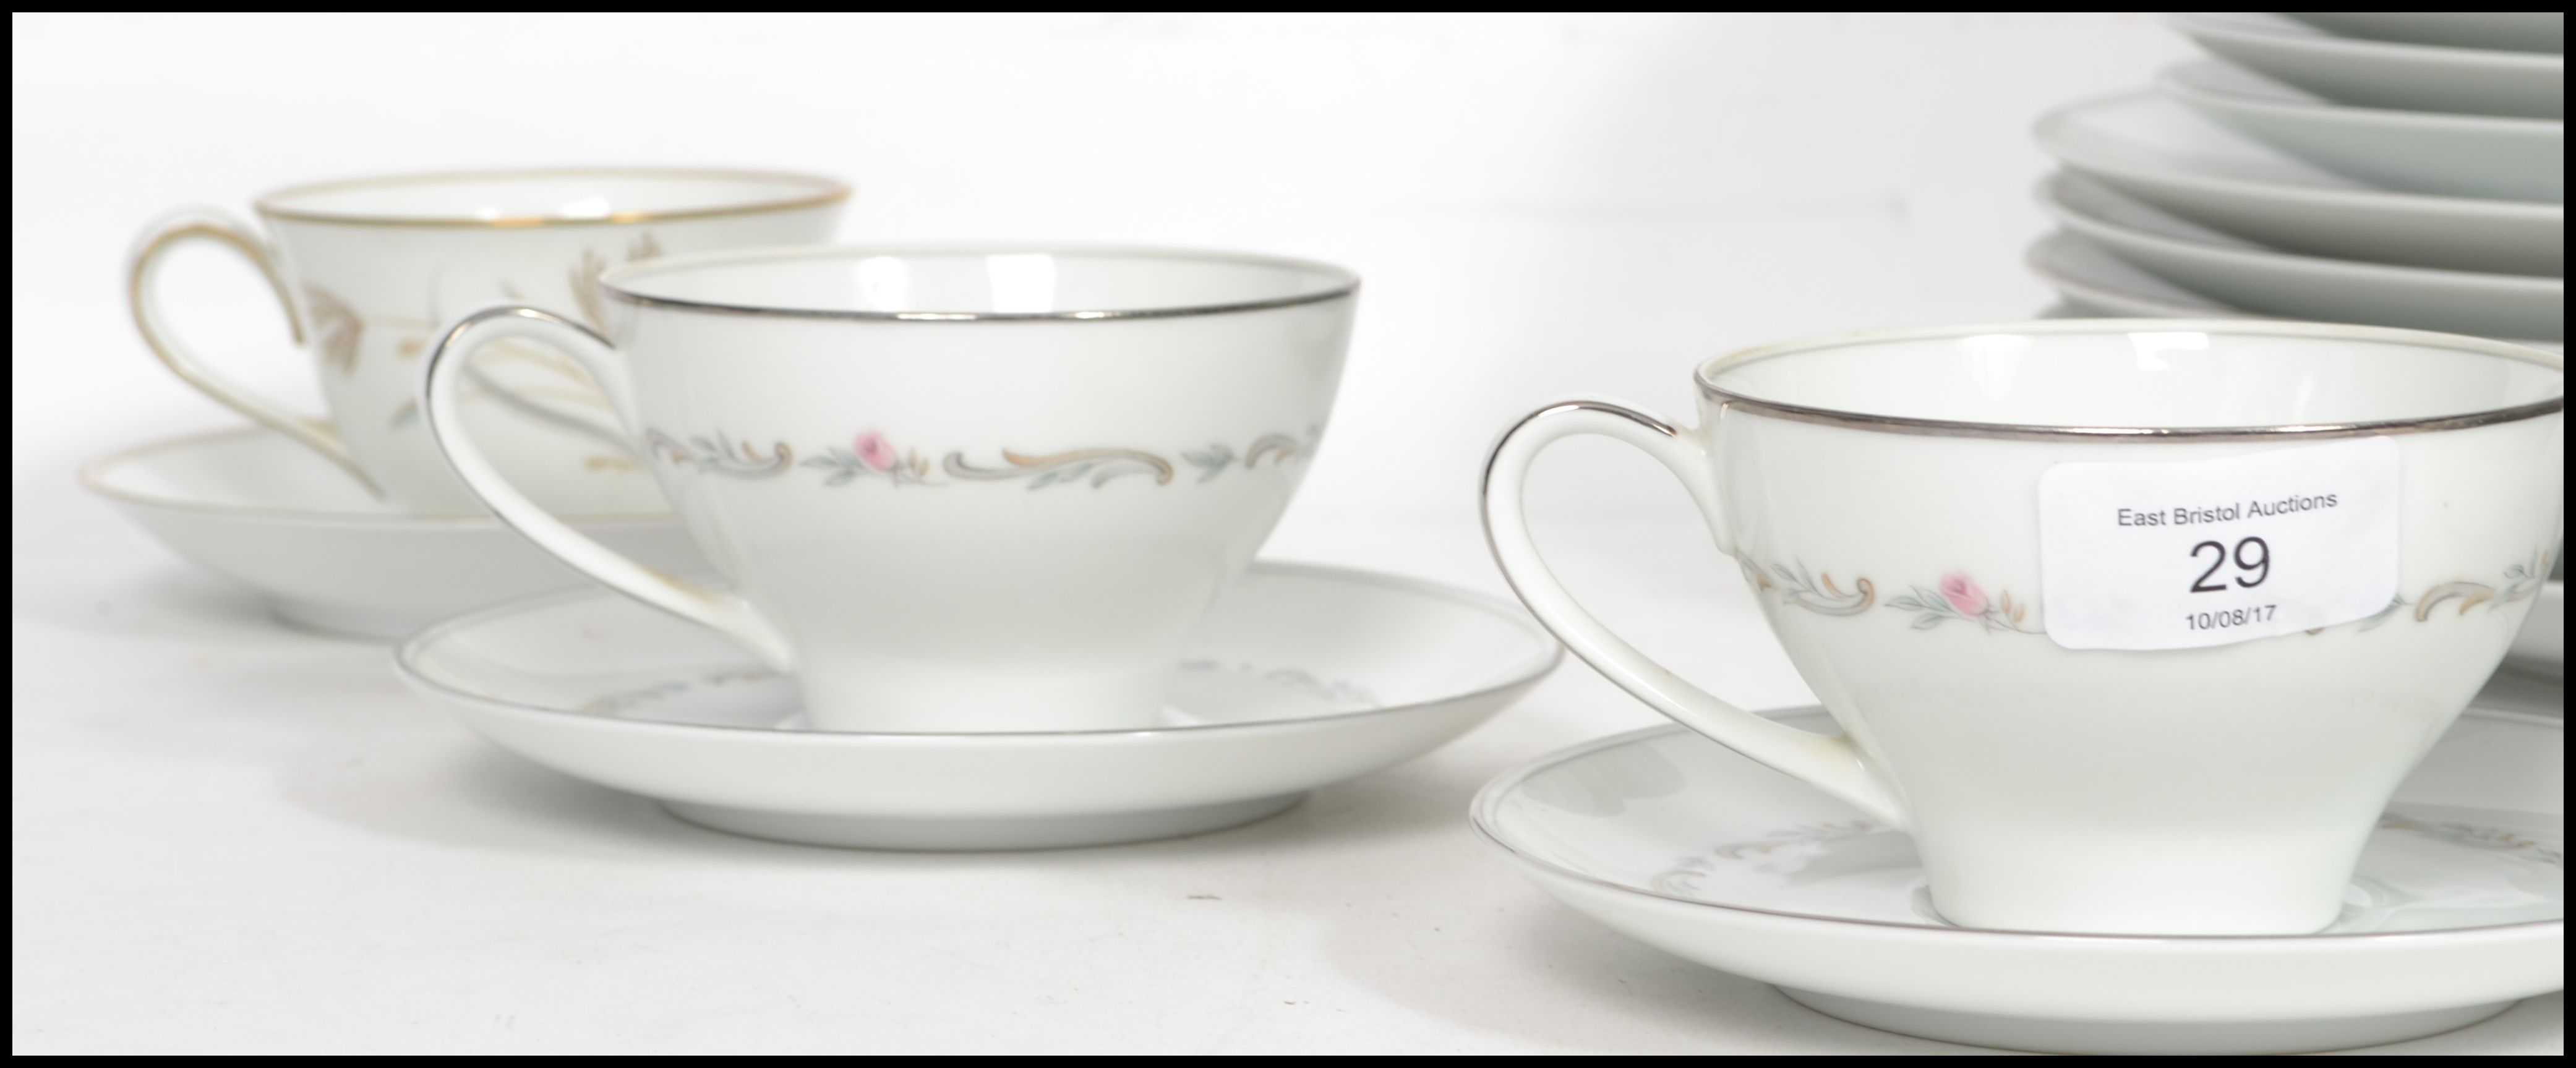 A Noritake 6 setting part tea and dinner service consisting of cups, saucer, side plates and - Image 3 of 7